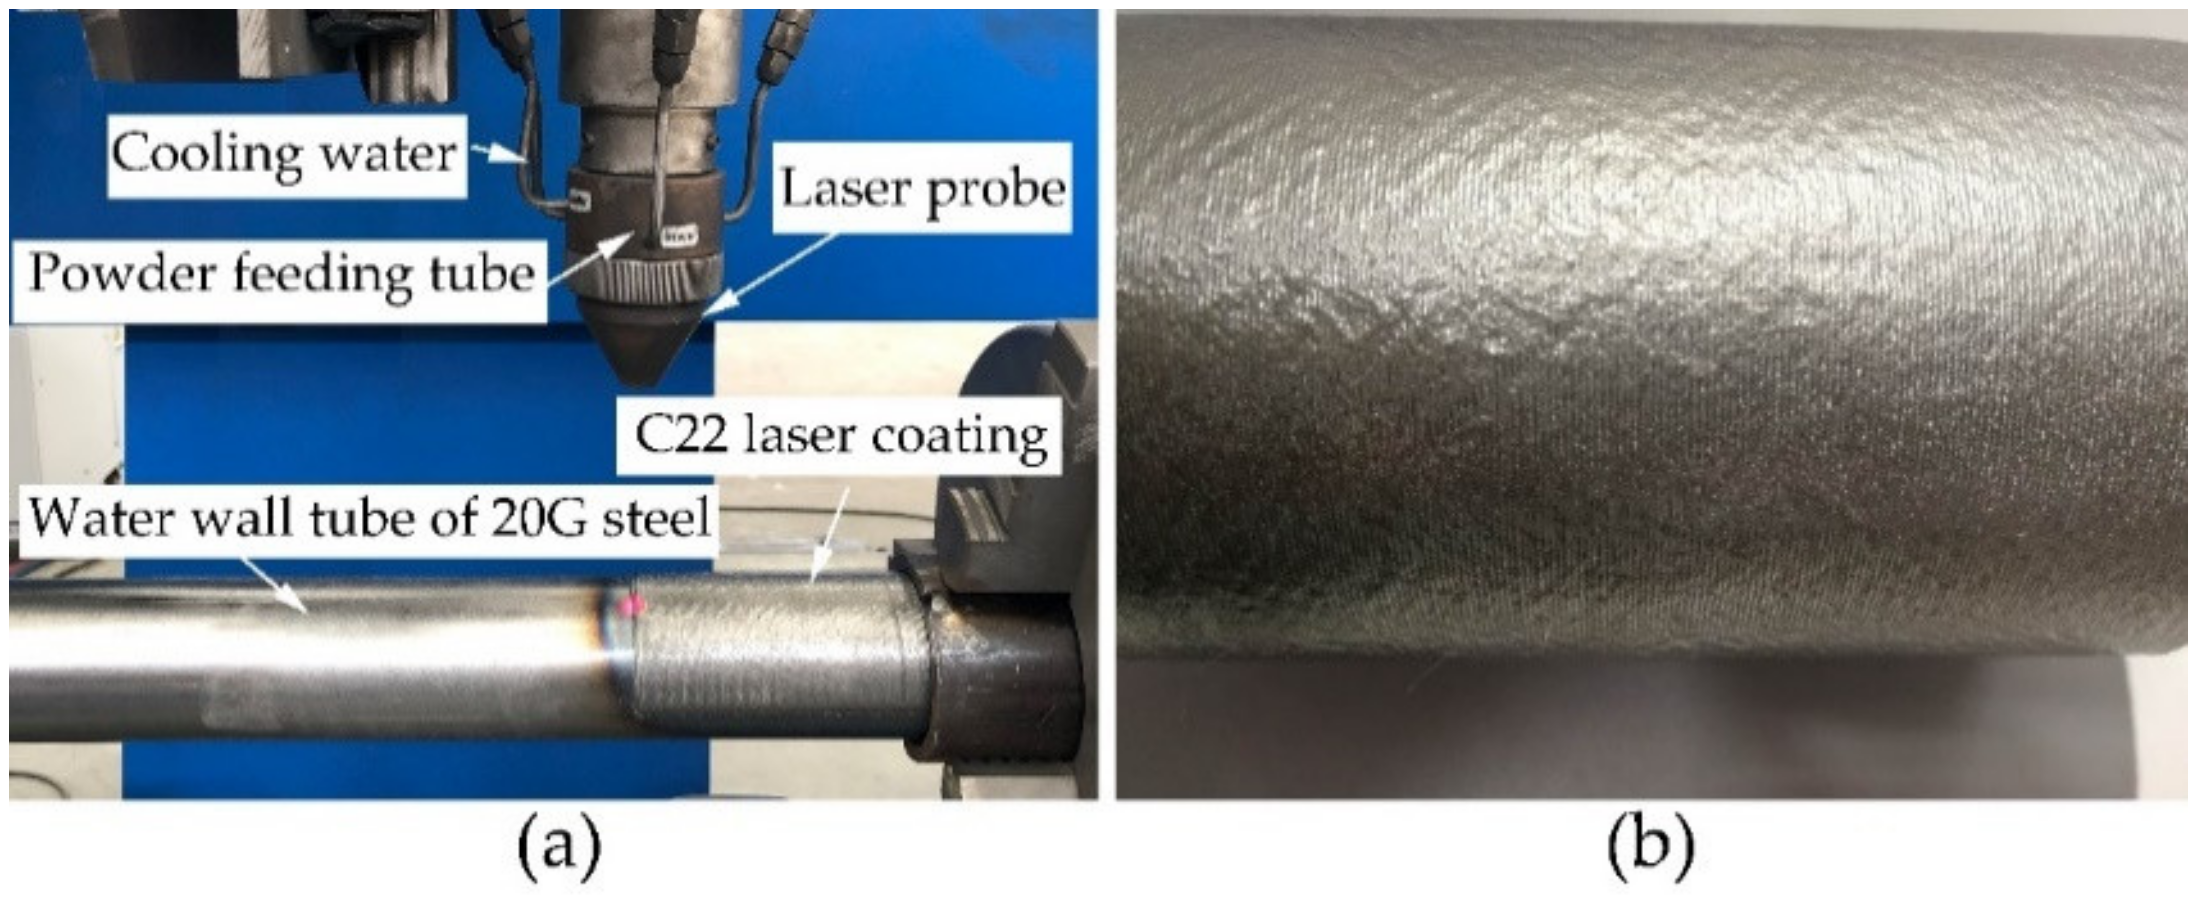 Coatings | Free Full-Text | High Temperature Corrosion Behaviors of 20G  Steel, Hastelloy C22 Alloy and C22 Laser Coating under Reducing Atmosphere  with H2S